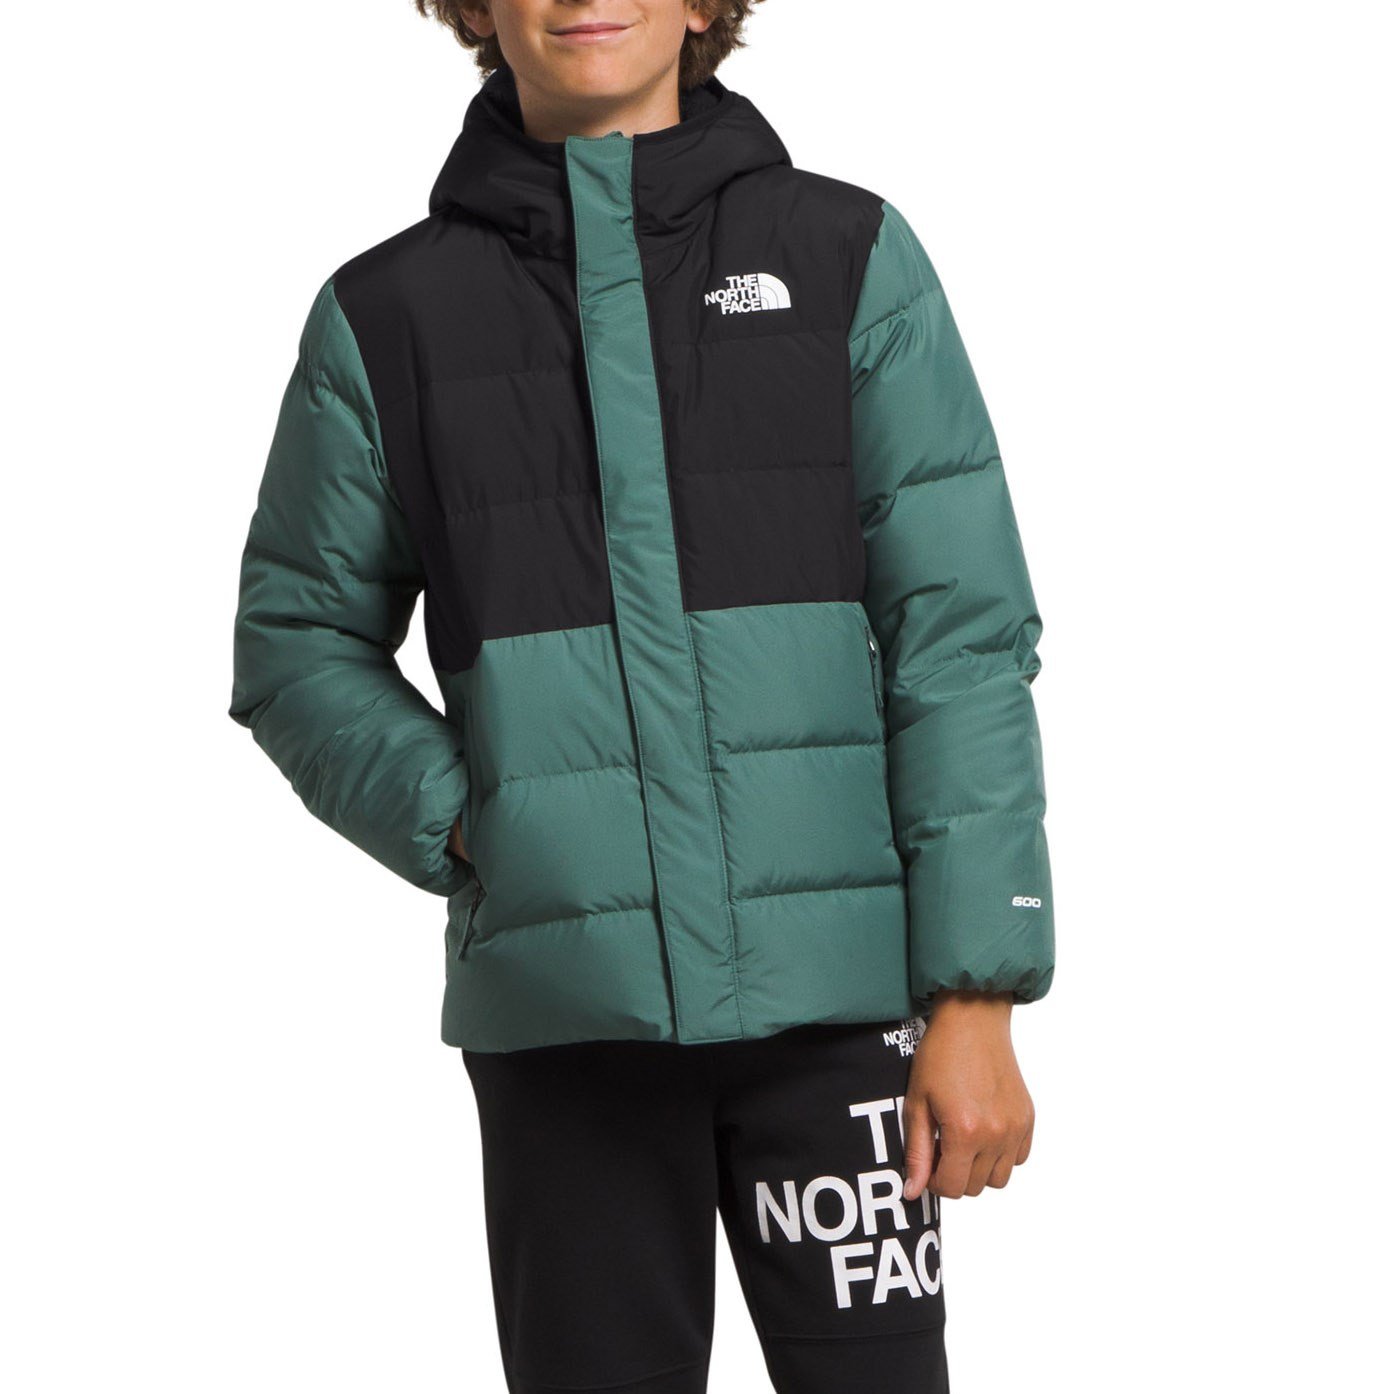 https://images.evo.com/imgp/zoom/238499/1045141/the-north-face-north-down-fleece-lined-parka-boys-.jpg